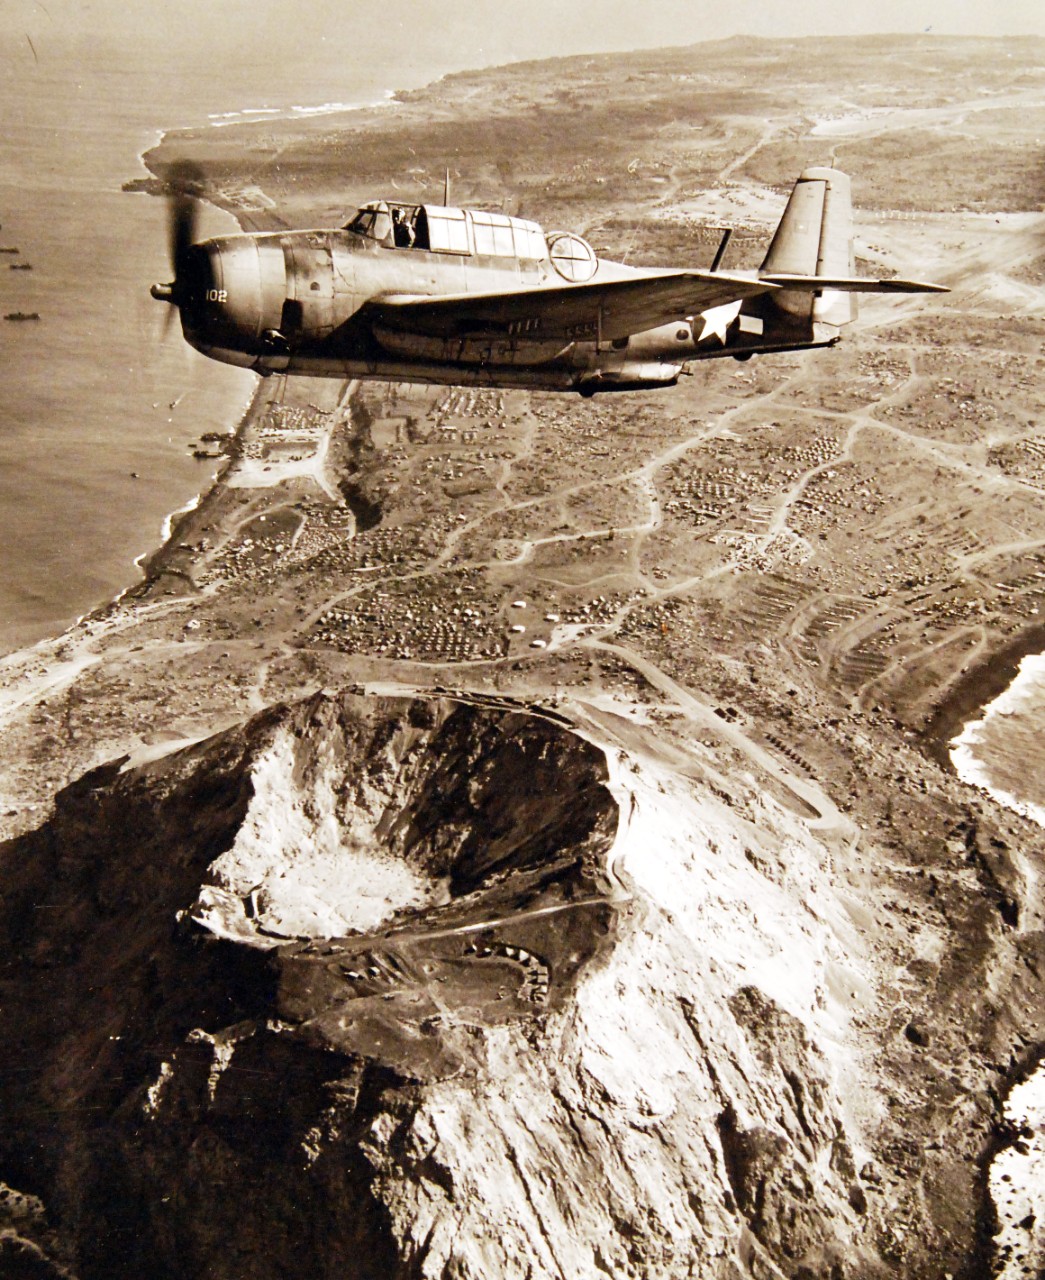 80-G-412543:  Battle for Iwo Jima, March 1945.  TBM aircraft flying over Mt. Suribachi shortly after Iwo Jima was secured.   Photographed by the Steichen Photograph Unit, March 1945.  TR-13268.  Official U.S. Navy Photograph, now in the collections of the National Archives.  (2018/02/14). 